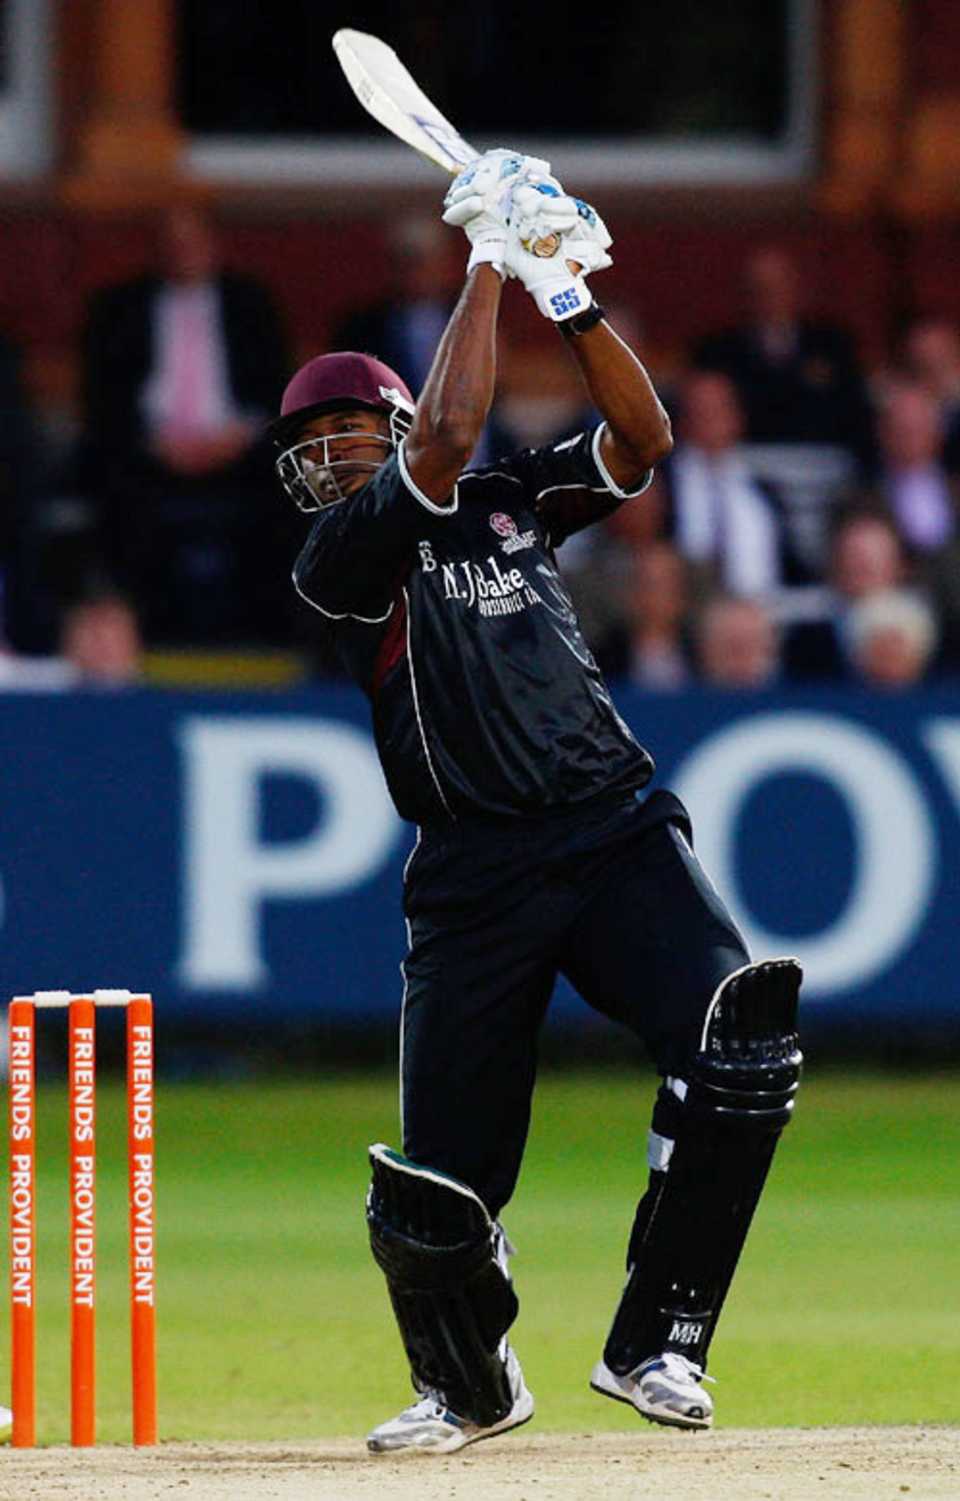 After a slow start, Kieron Pollard single-handedly powered Somerset to a win